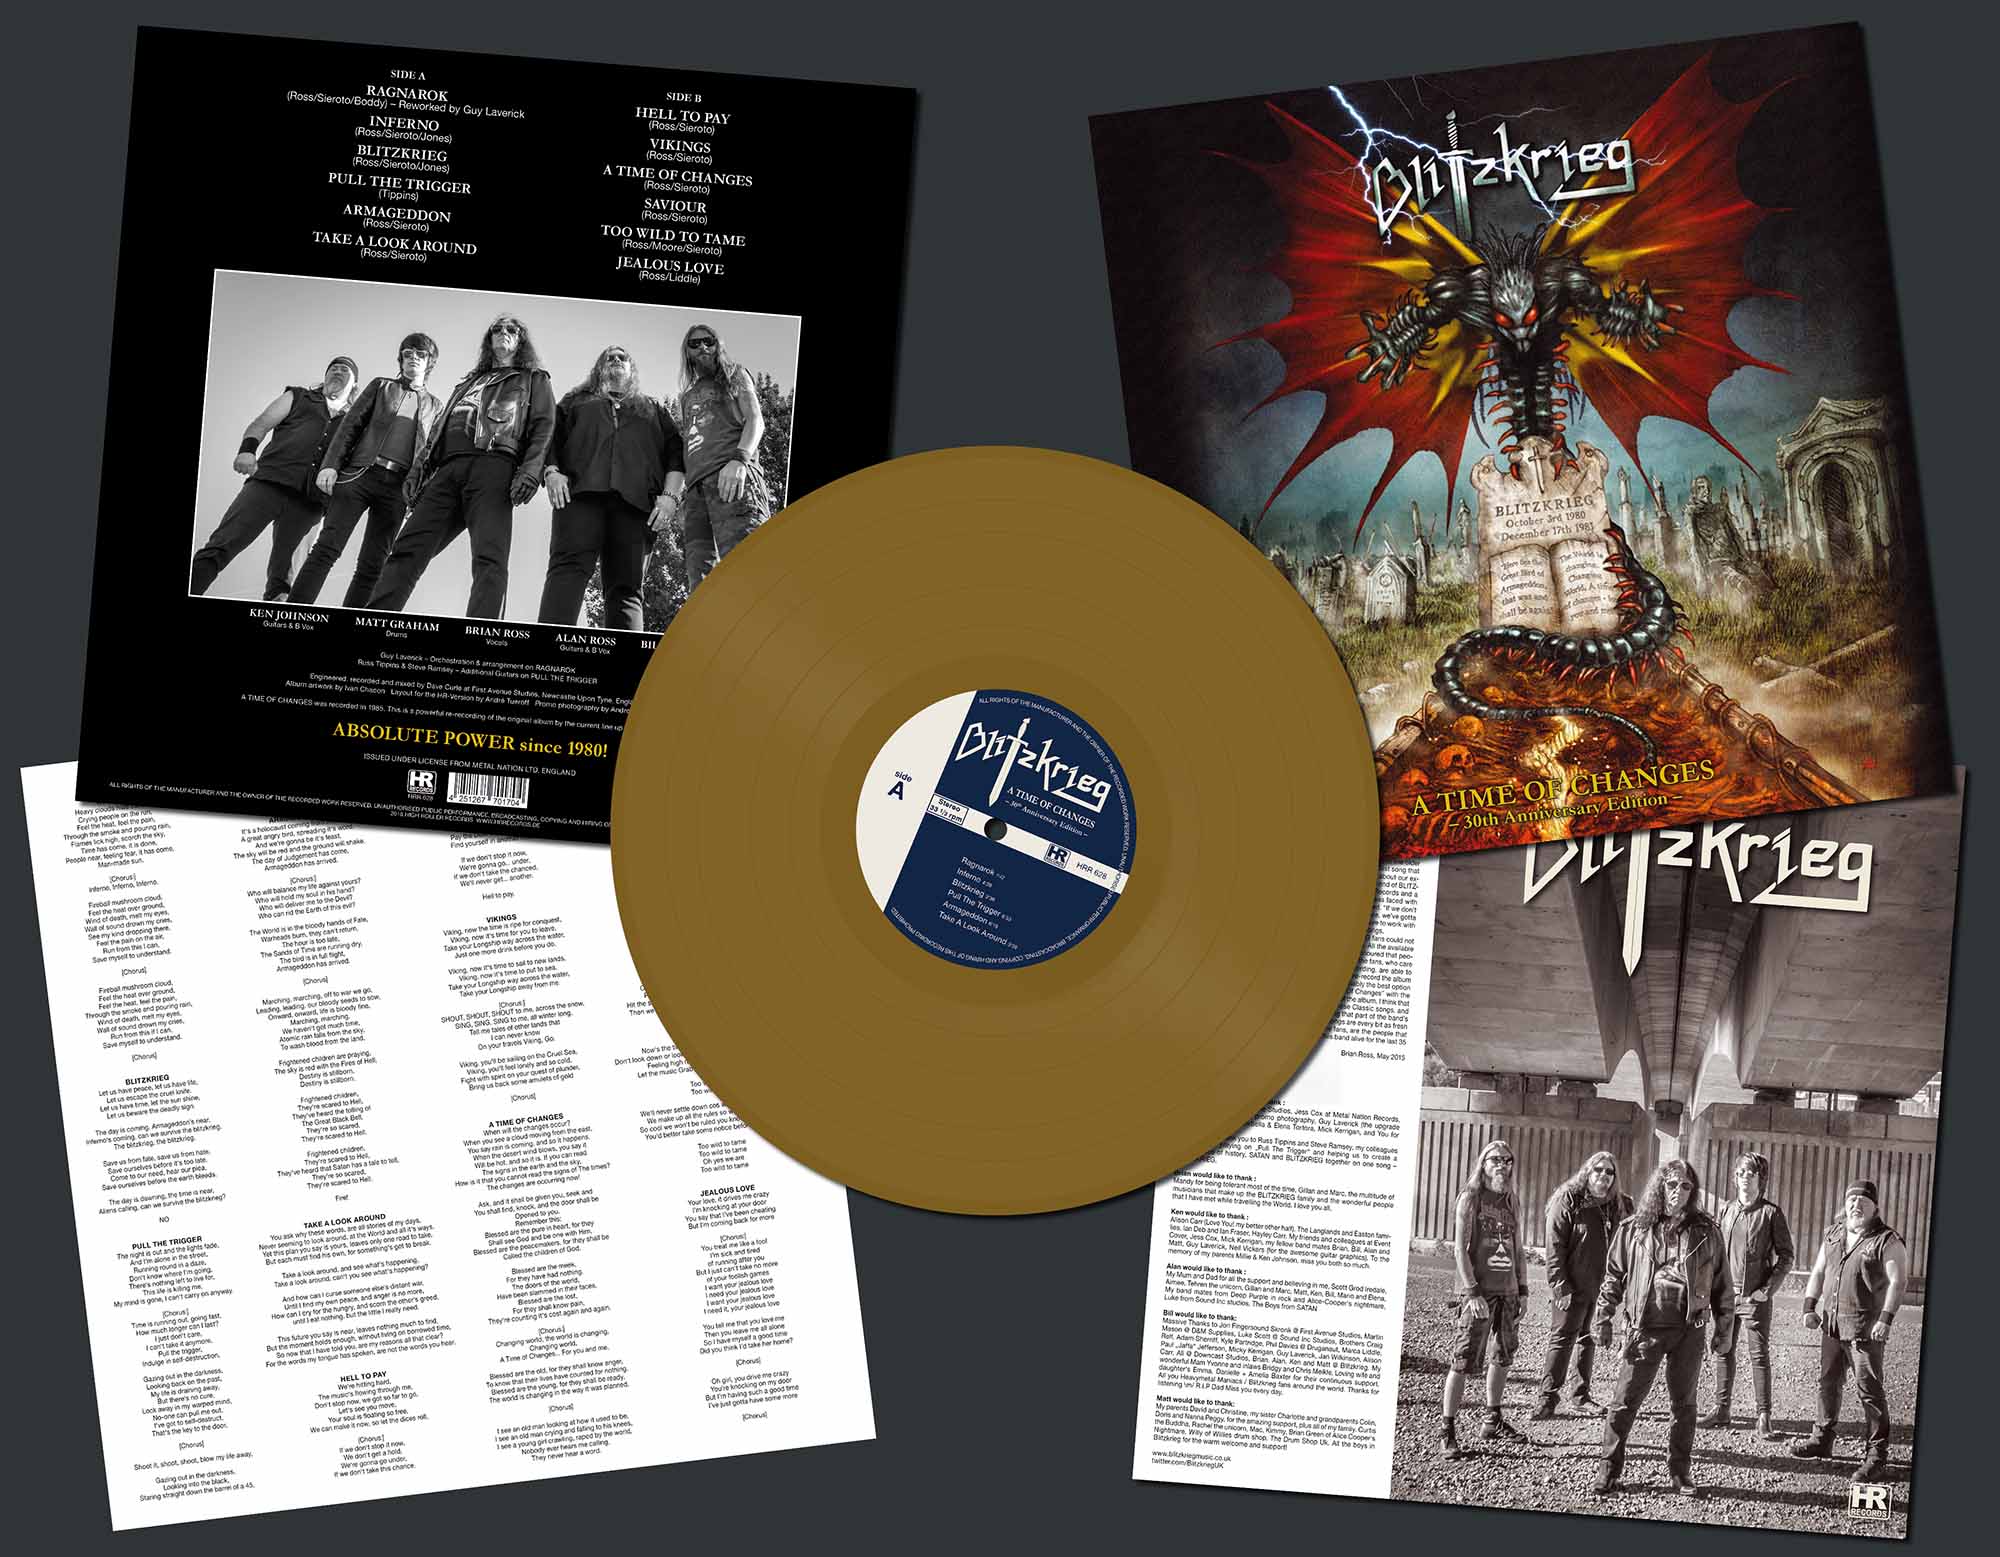 BLITZKRIEG - A Time of Changes 30th Anniversary Edition  LP